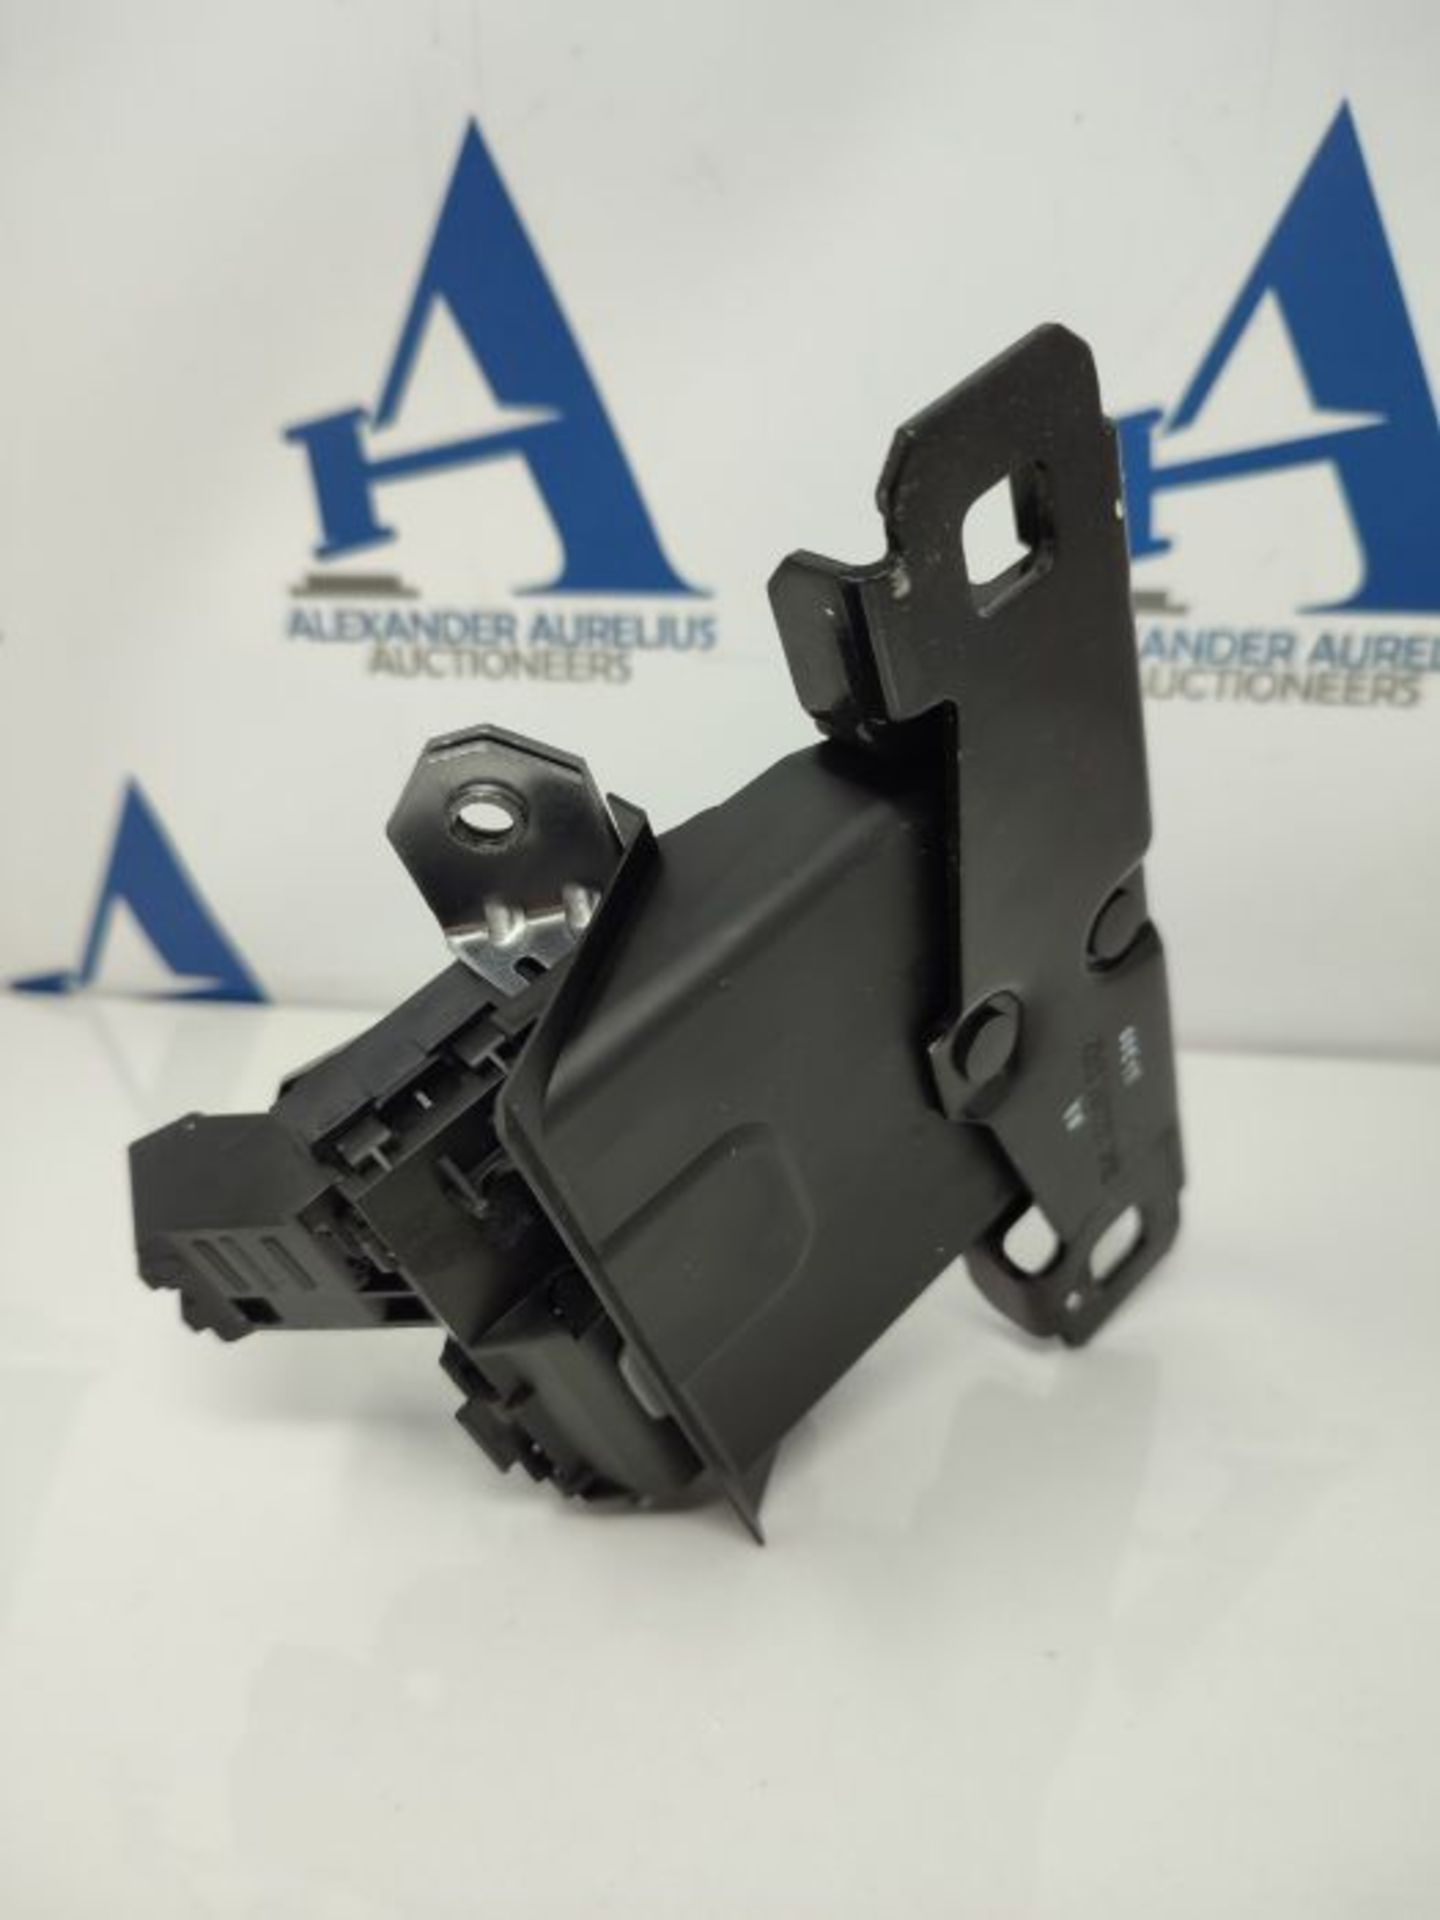 KASturbo Rear Tailgate Lock, Car Trunk Boot Latch Actuator for Focus S-Max 8M51R442A66 - Image 3 of 3